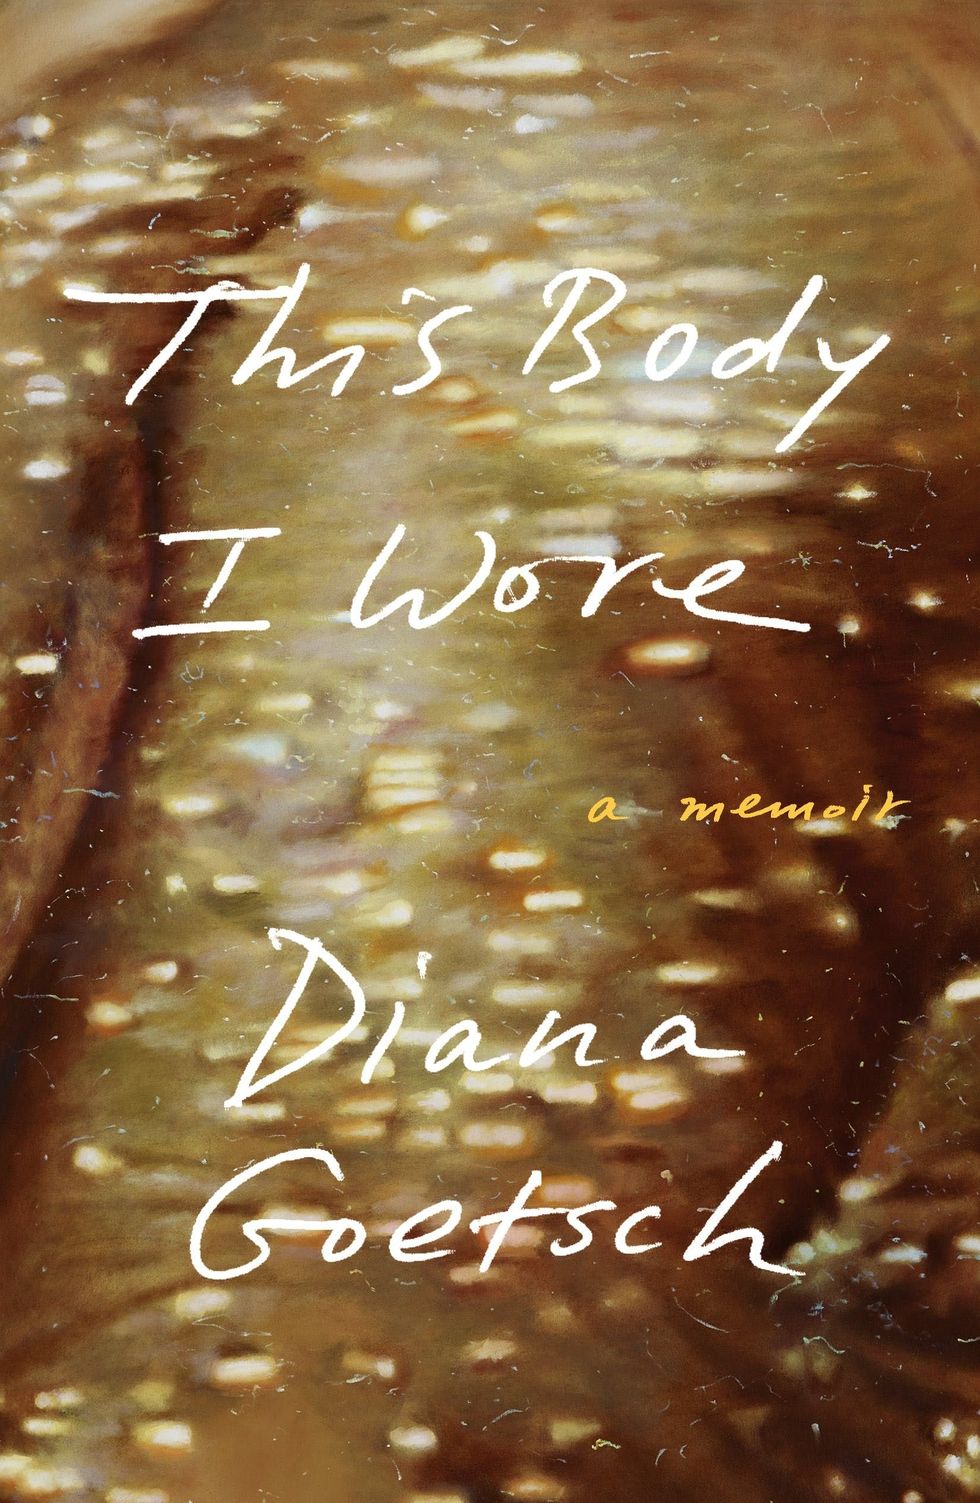 This Body I Wore by Diana Goetsch